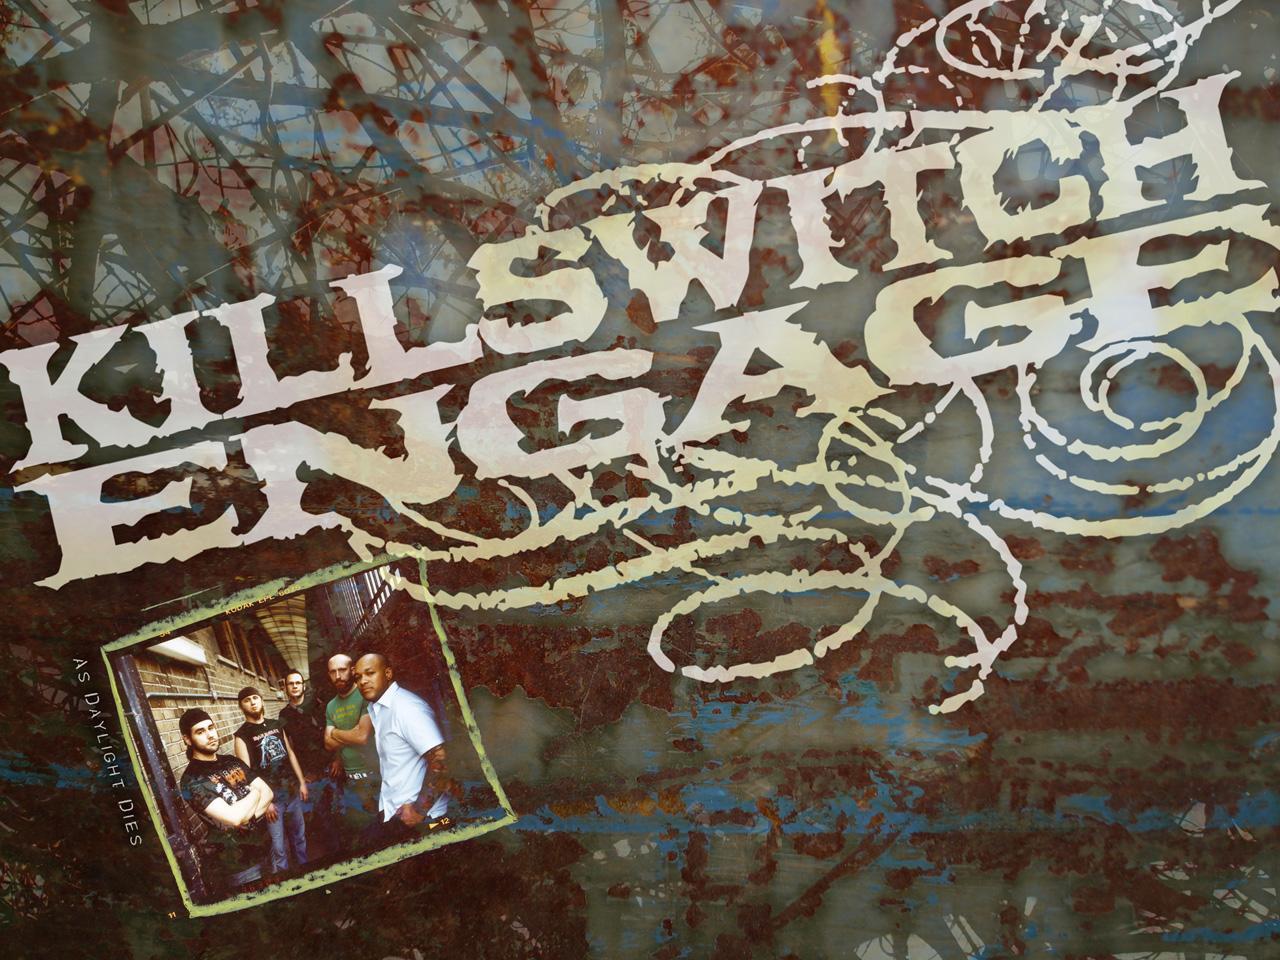 Killswitch Engage Wallpaper HD Picture 17 Download. Wallpaperiz